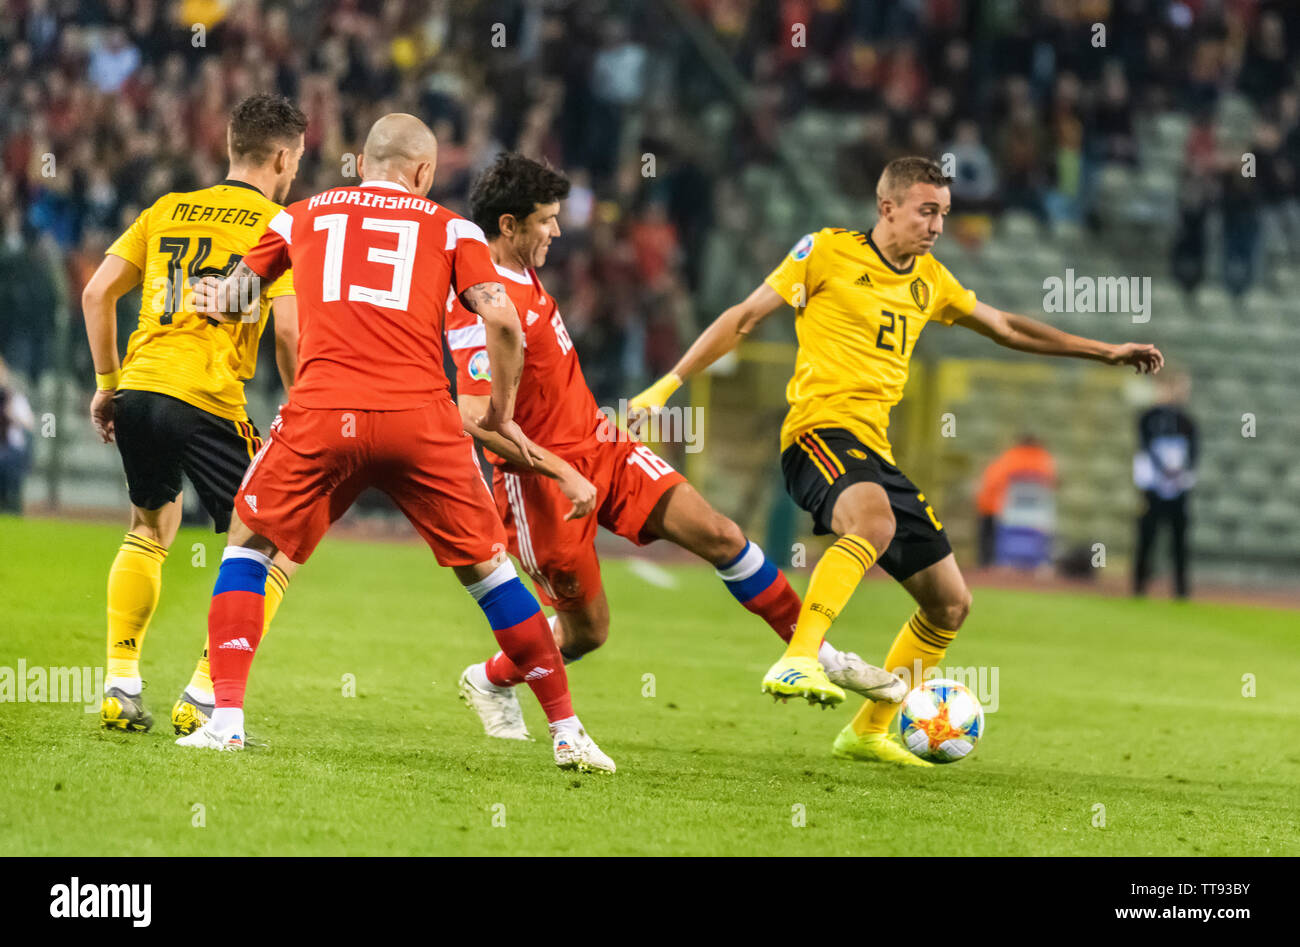 Brussels, Belgium - March 21, 2019. Belgium national football team players Dries Mertens and Timothy Castagne against Russia players Fedor Kudryashov Stock Photo